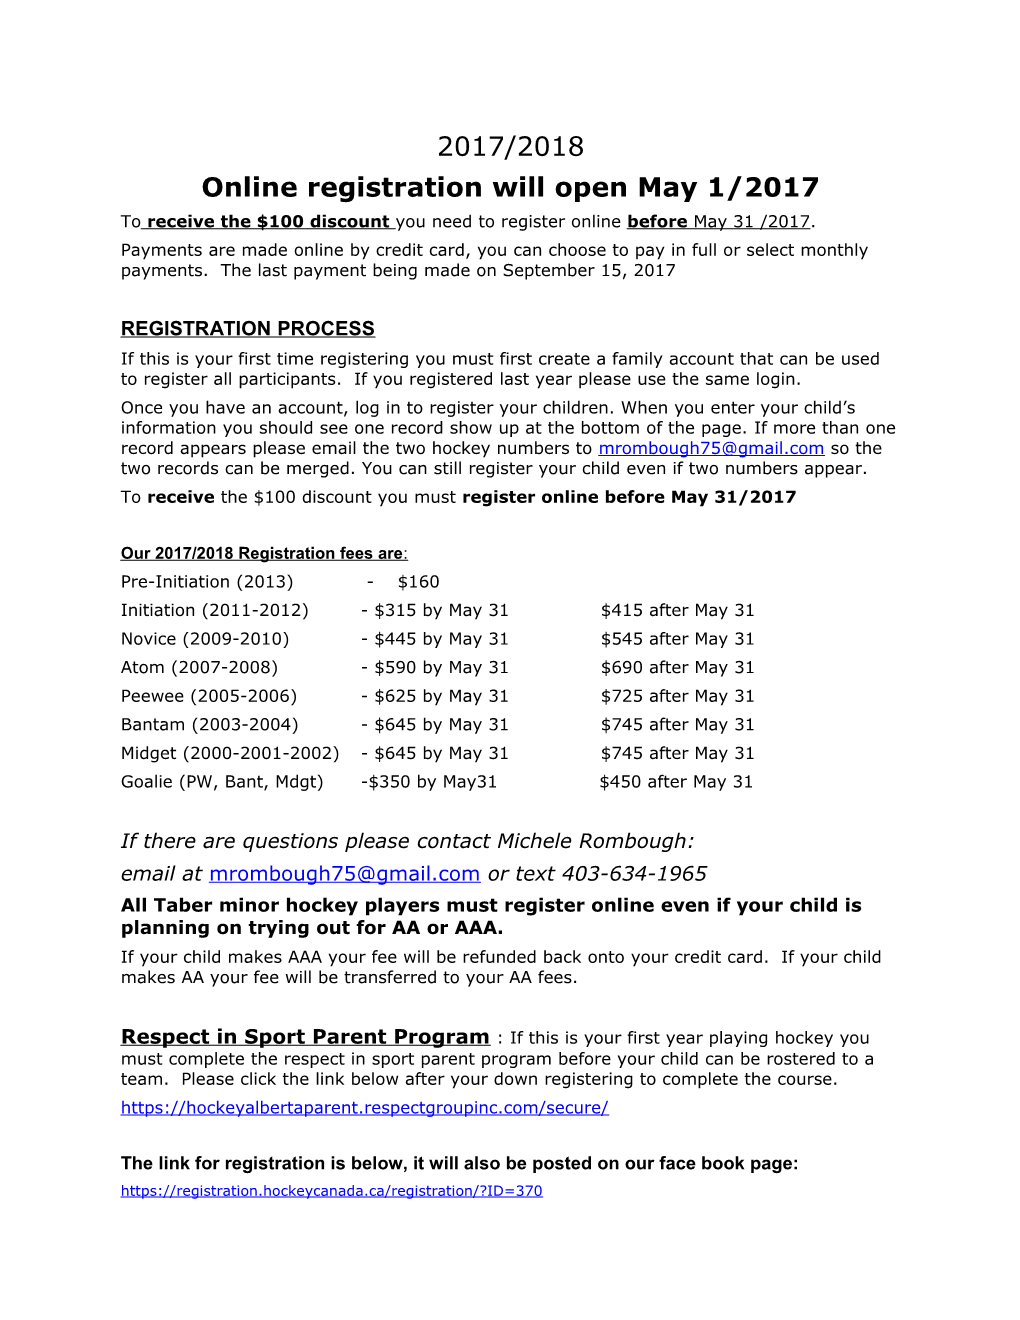 Online Registration Will Open May 1/2017